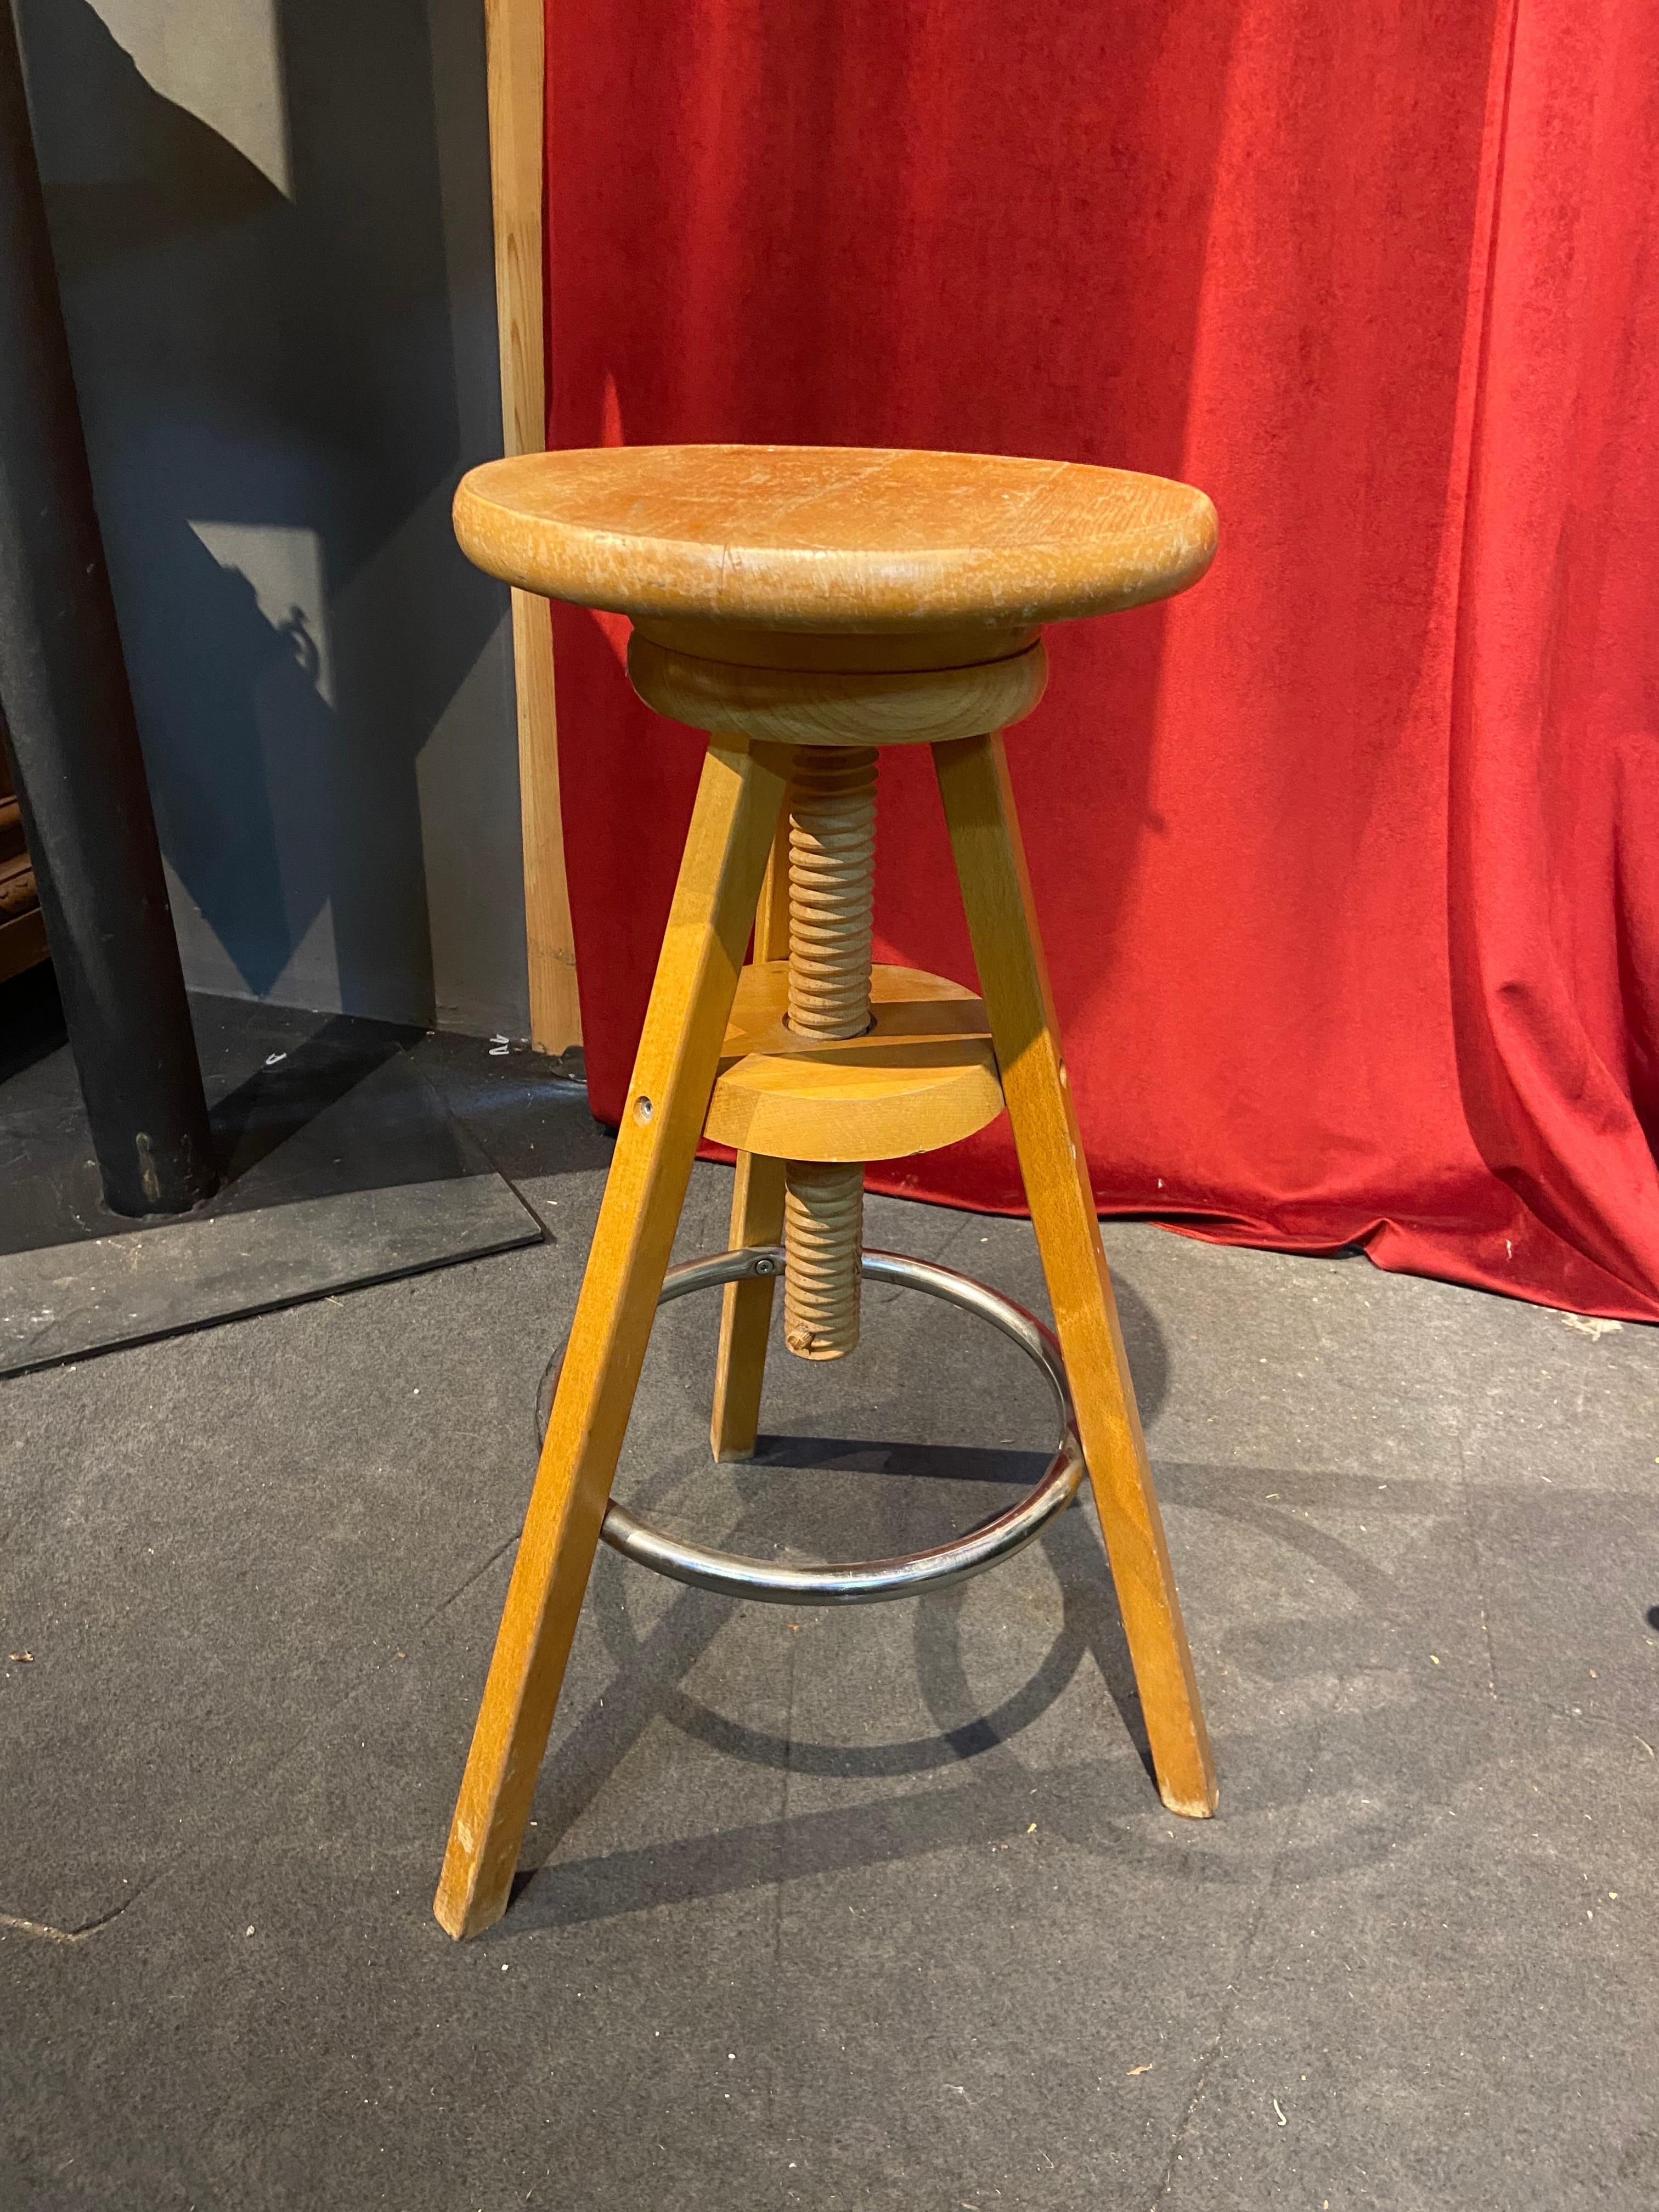 Wooden swivel round chair usually used in artists studios. Made in France in mid 20th century it is still very stable and comfortable to work on it. There are no restorations and it is in original condition.